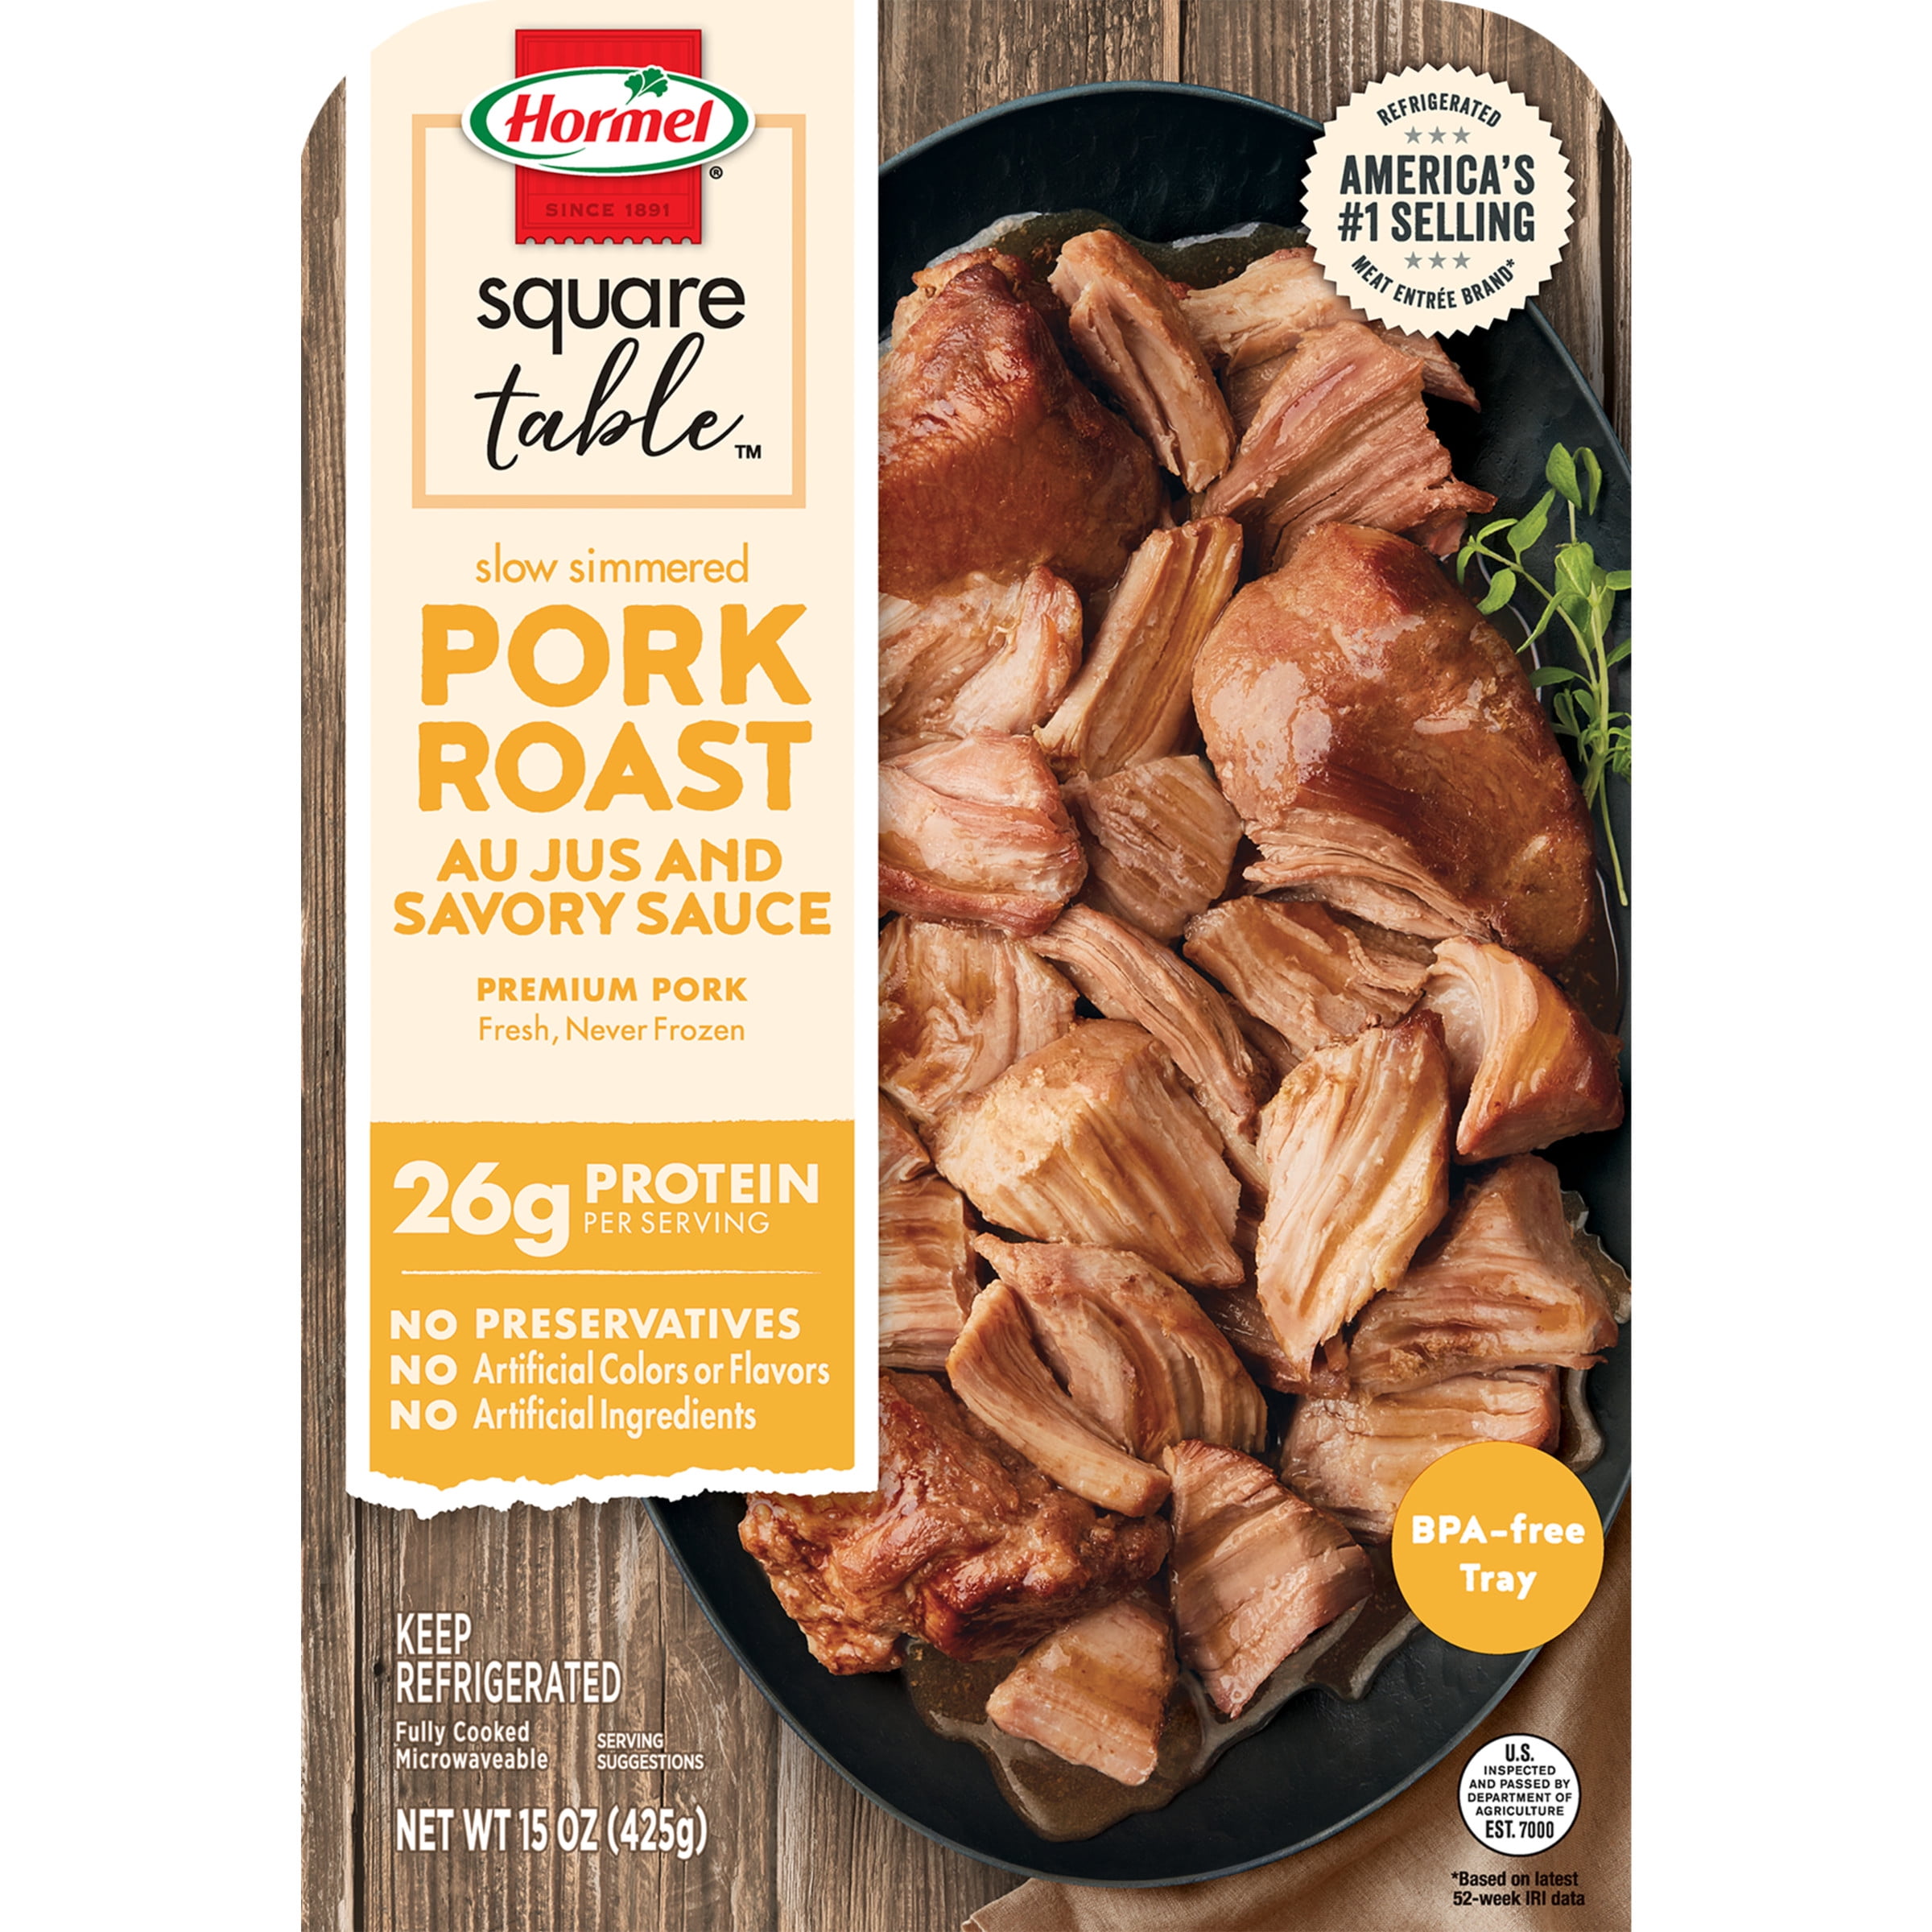 HORMEL SQUARE TABLE Slow Simmered Pork Roast Au Jus & Savory Sauce, 15 oz  Plastic Tray (8 Servings per Package) 